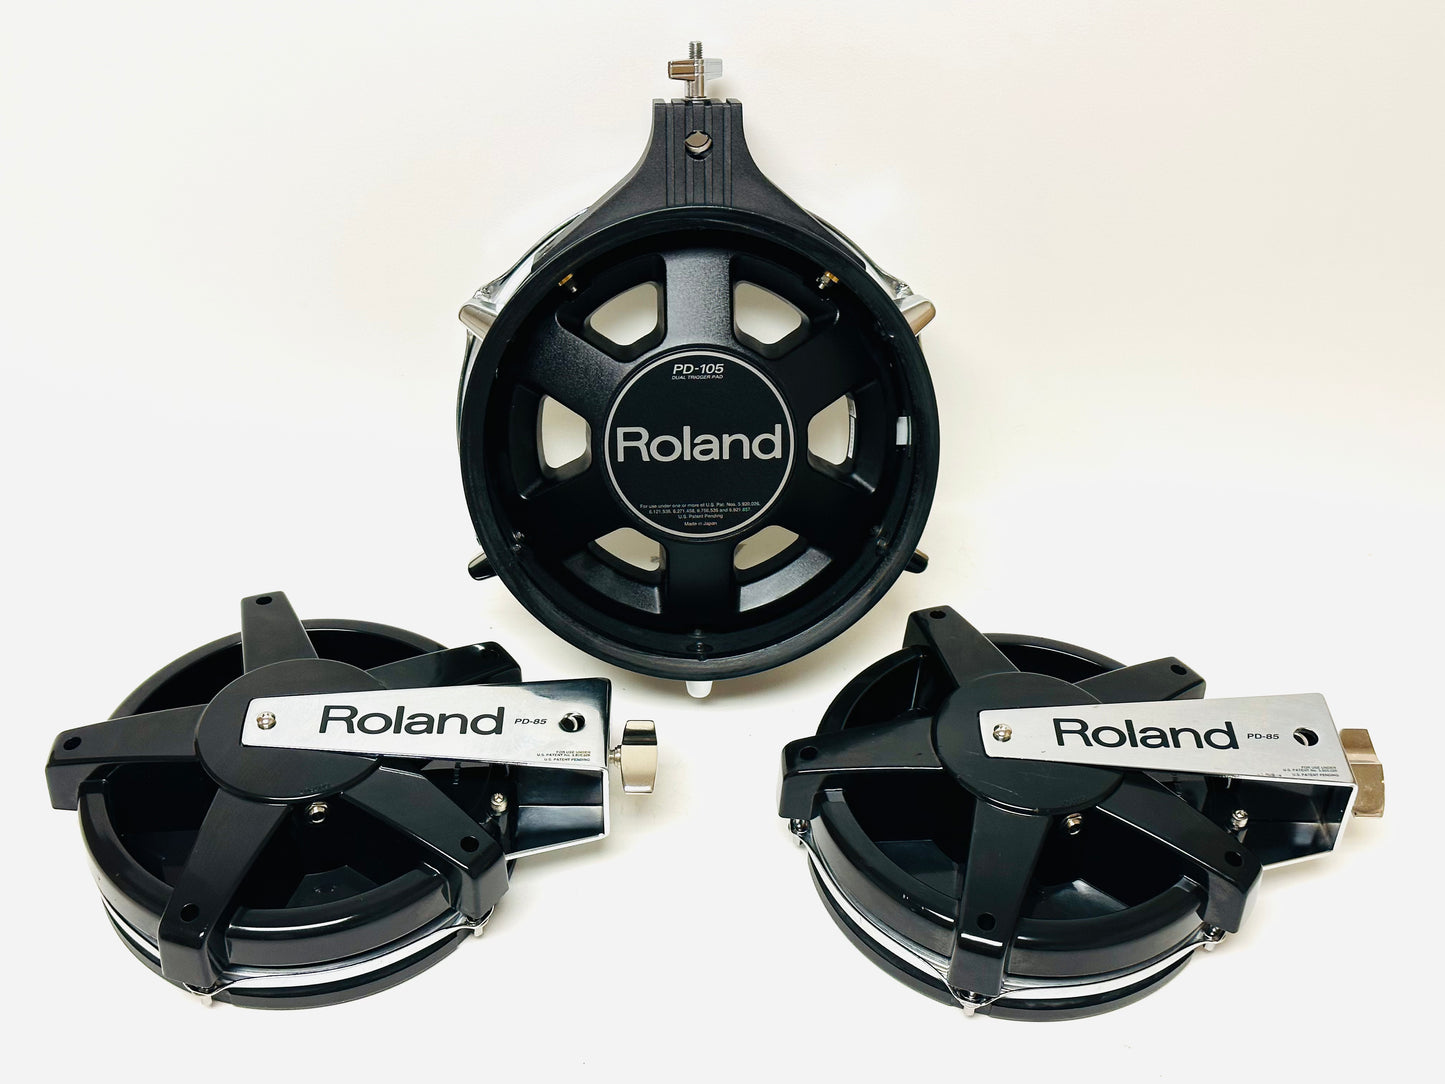 Roland Mesh Pad Set (1) PD-105 and (2) PD-85